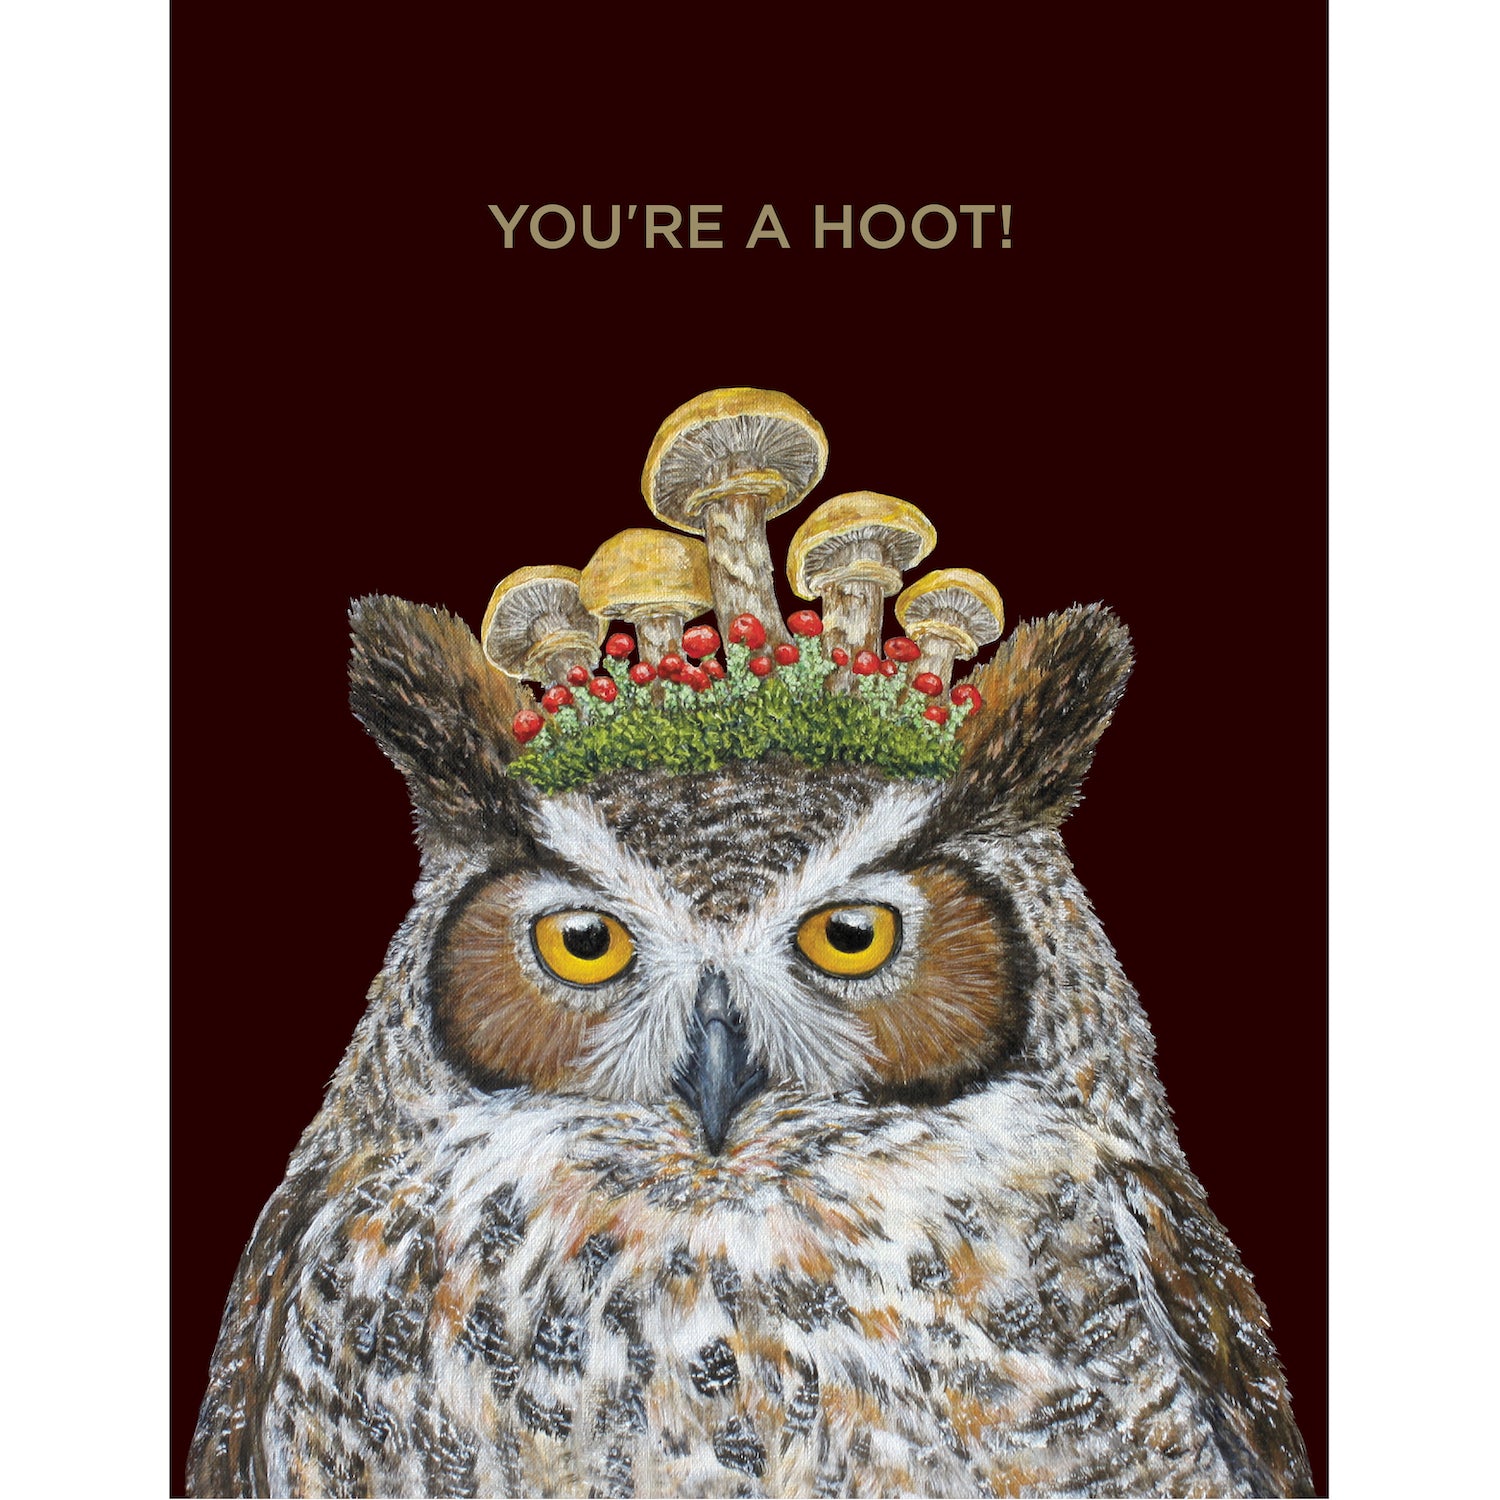 This Hester &amp; Cook Hoot Owl Card features original artwork and is accentuated with gold foil.